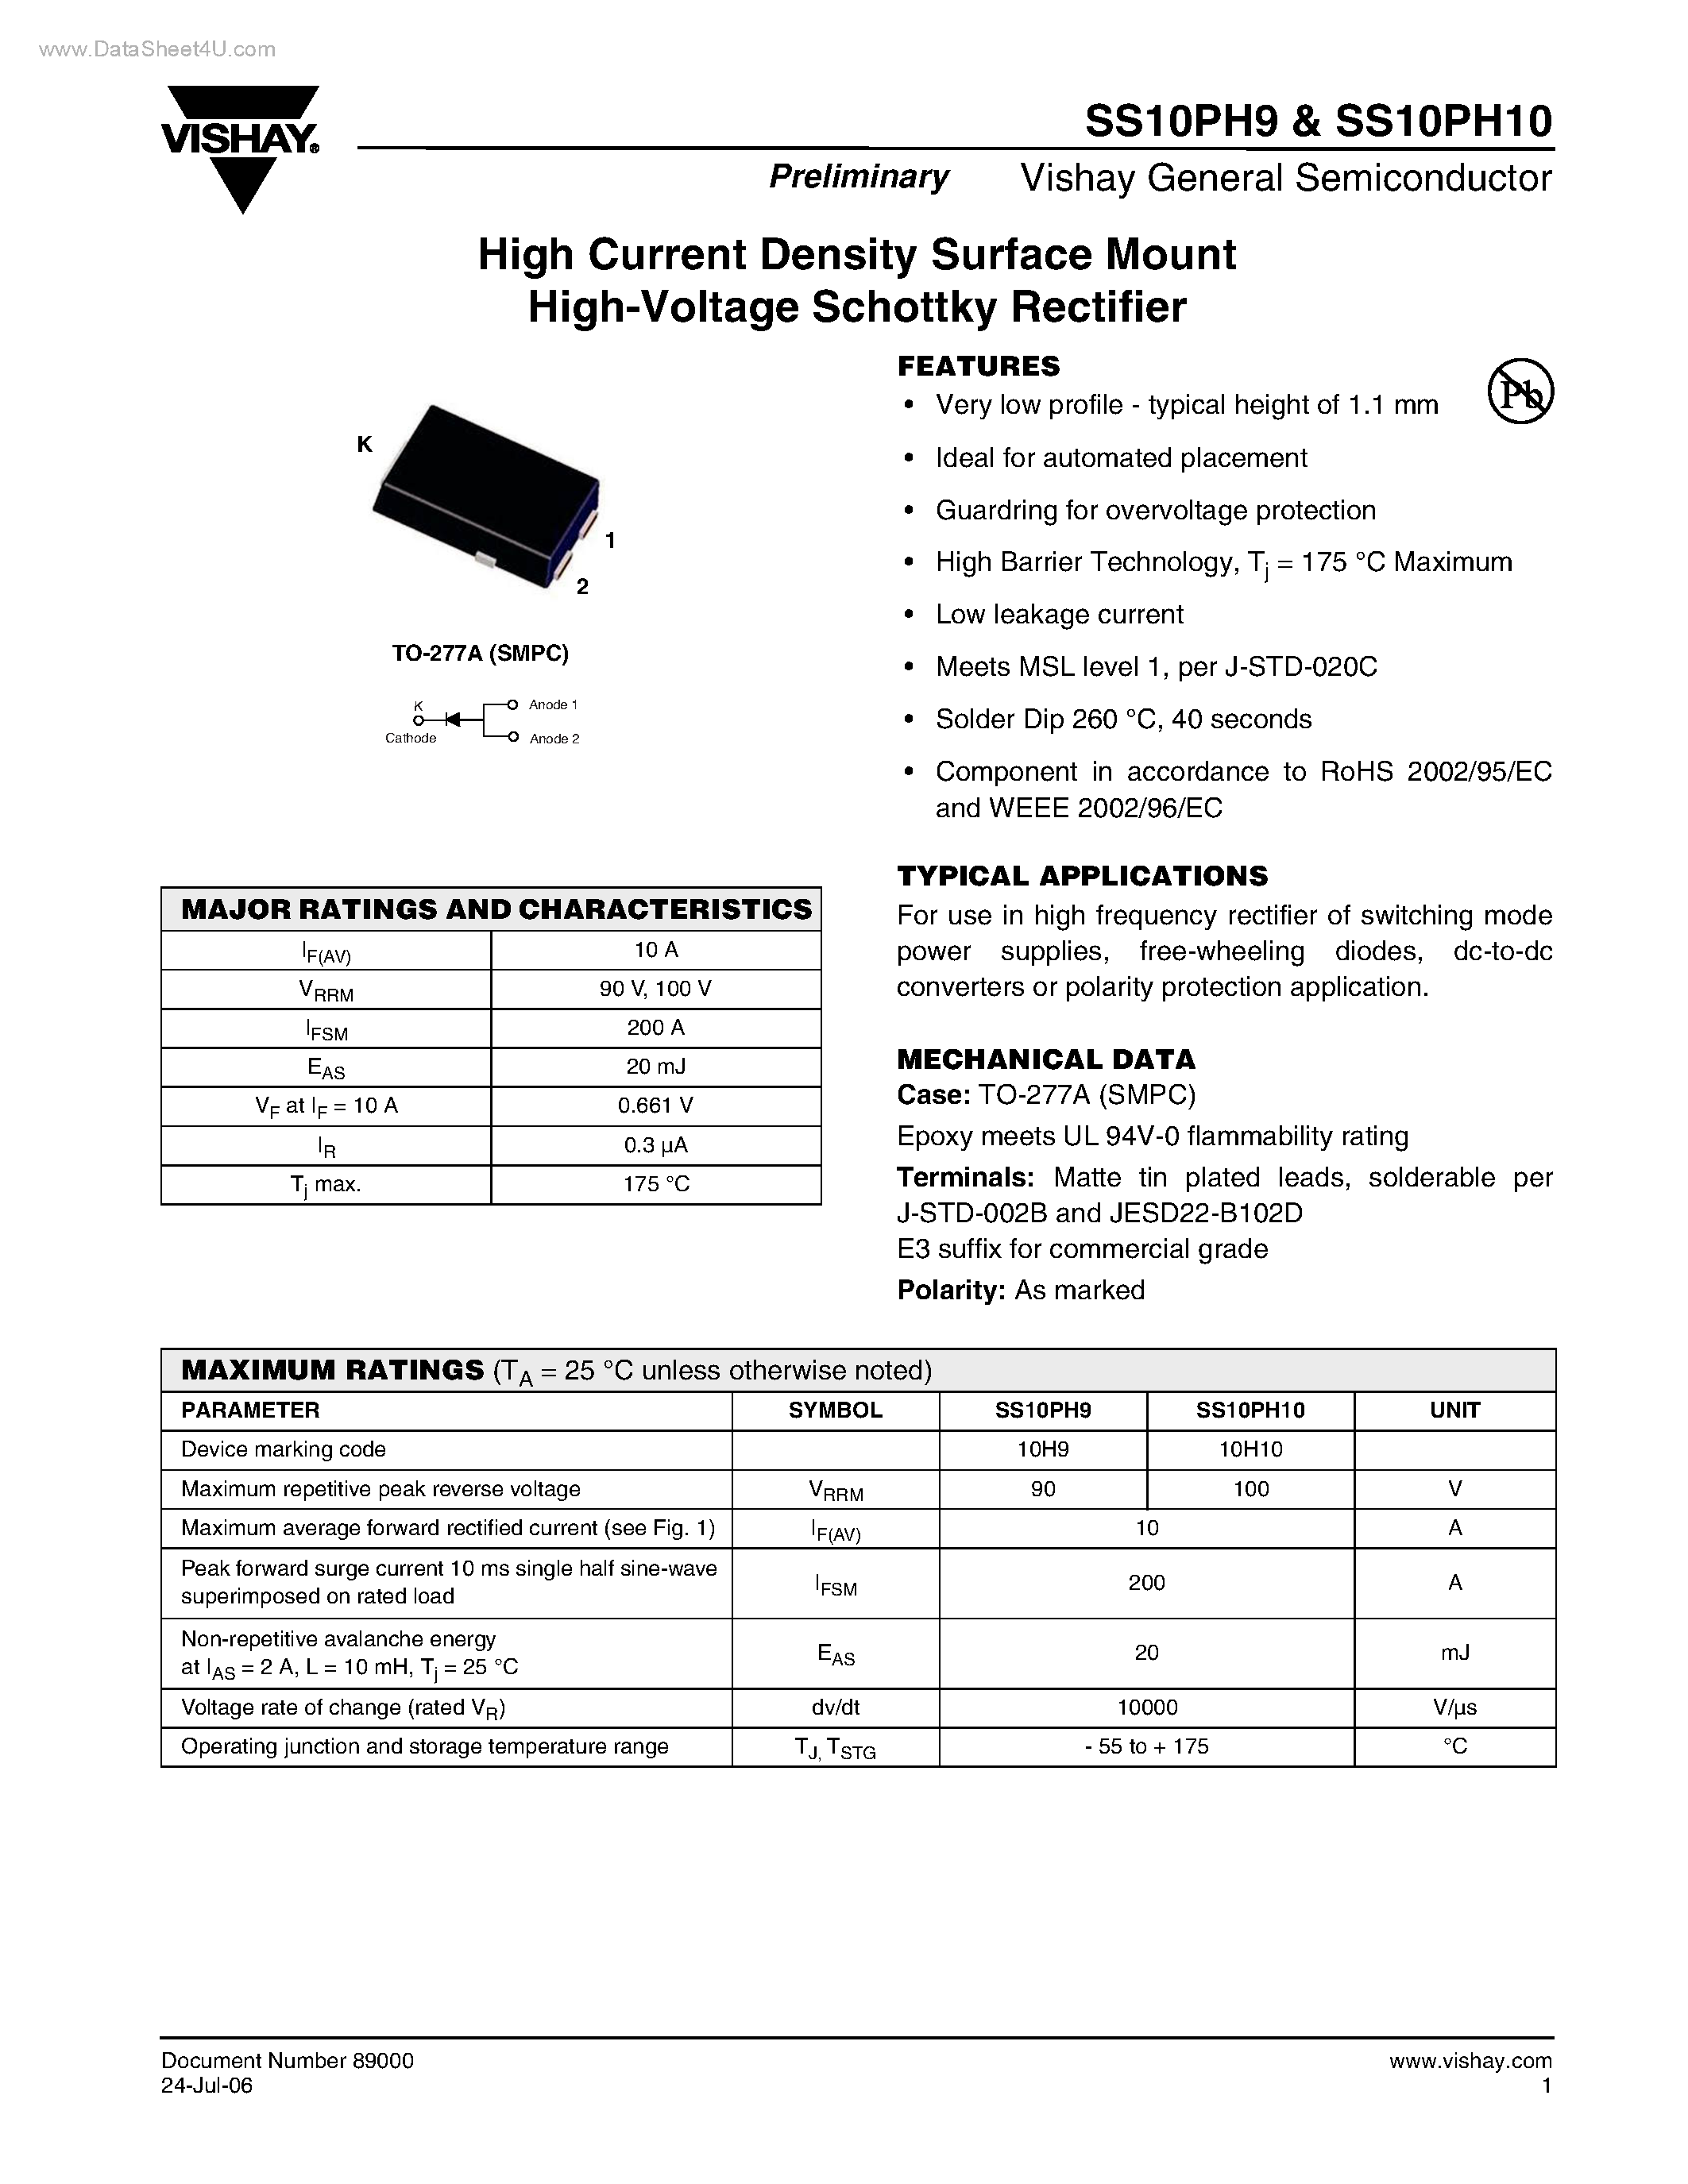 Datasheet SS10PH10 - (SS10PH9 / SS10PH10) High Current Density Surface Mount High-Voltage Schottky Rectifier page 1